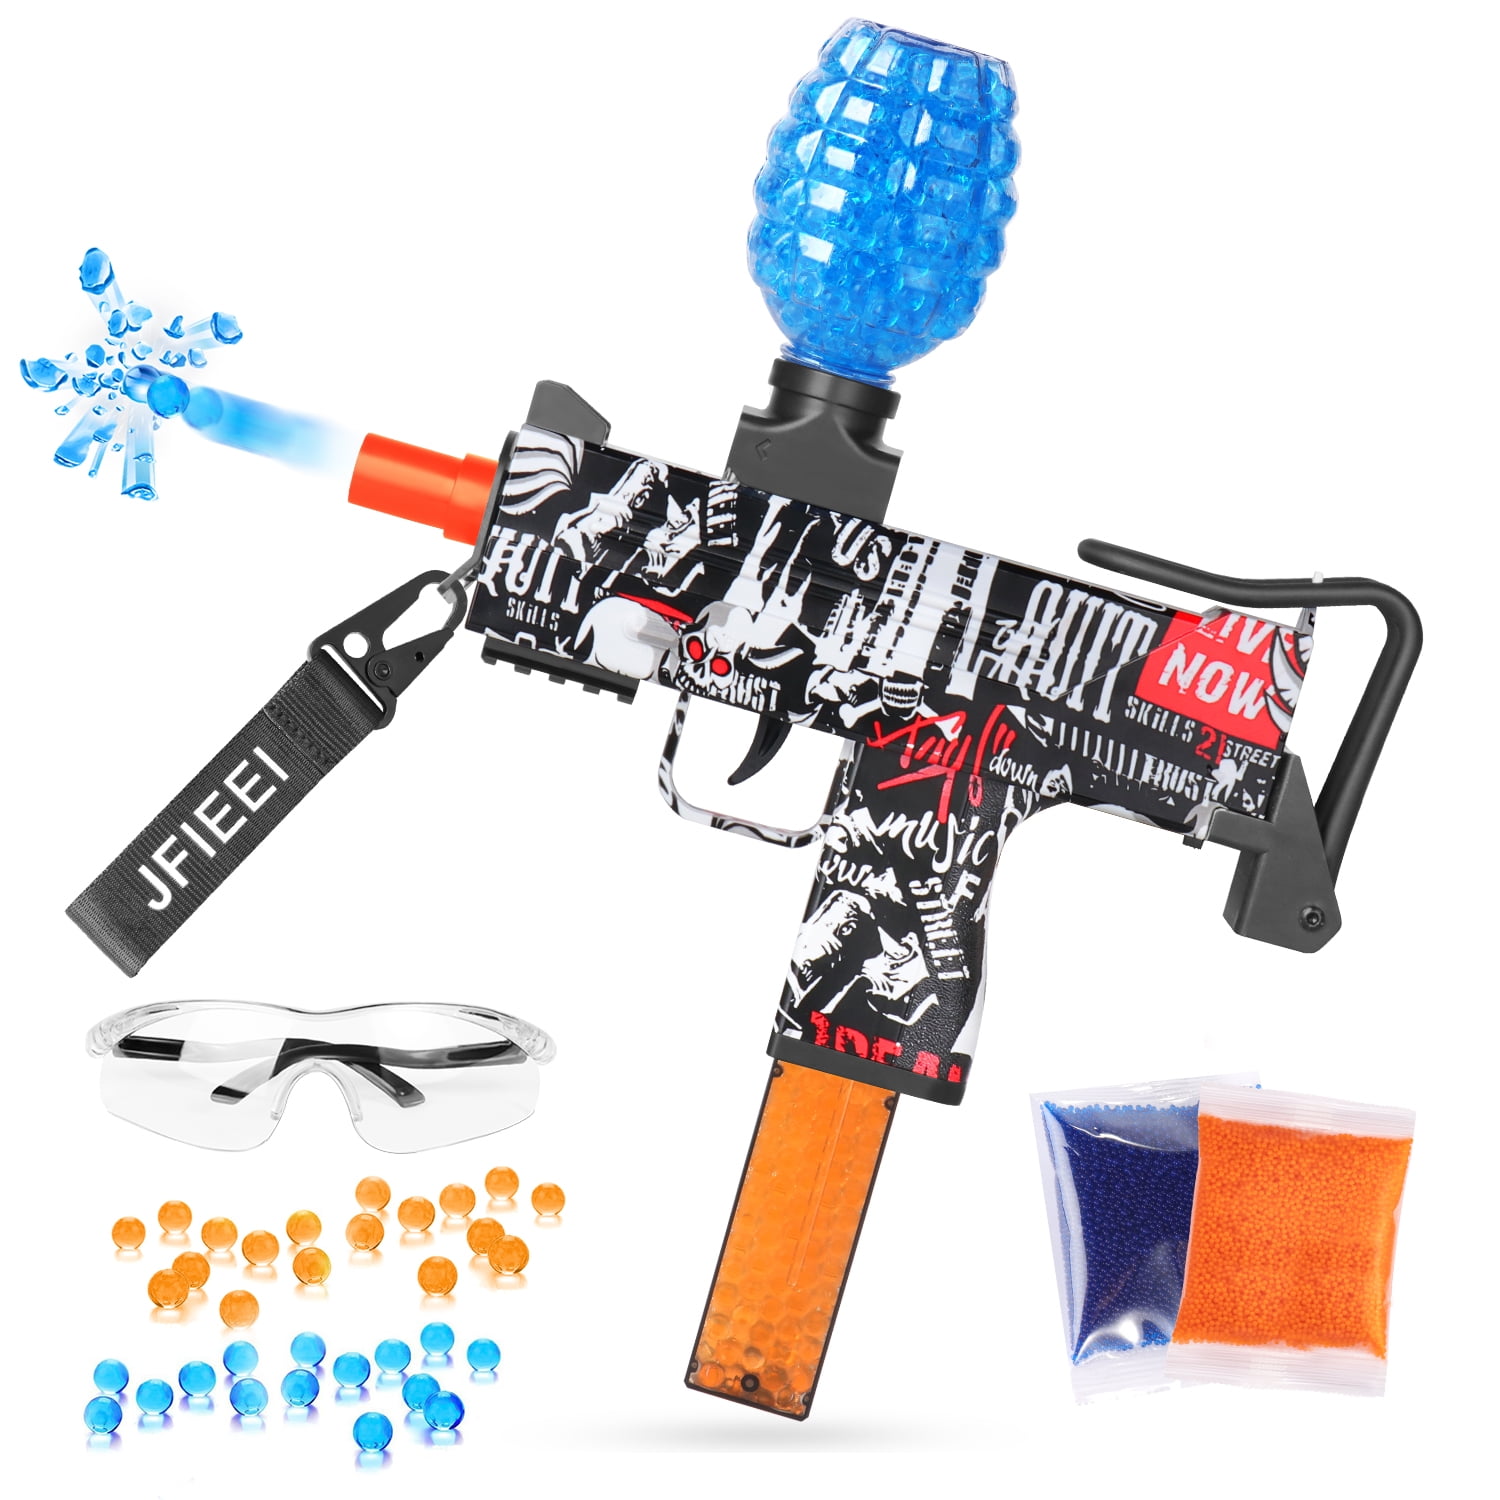 Ball Gel Blaster, Gimify Gel Ball Blaster for Outdoor Activity,w